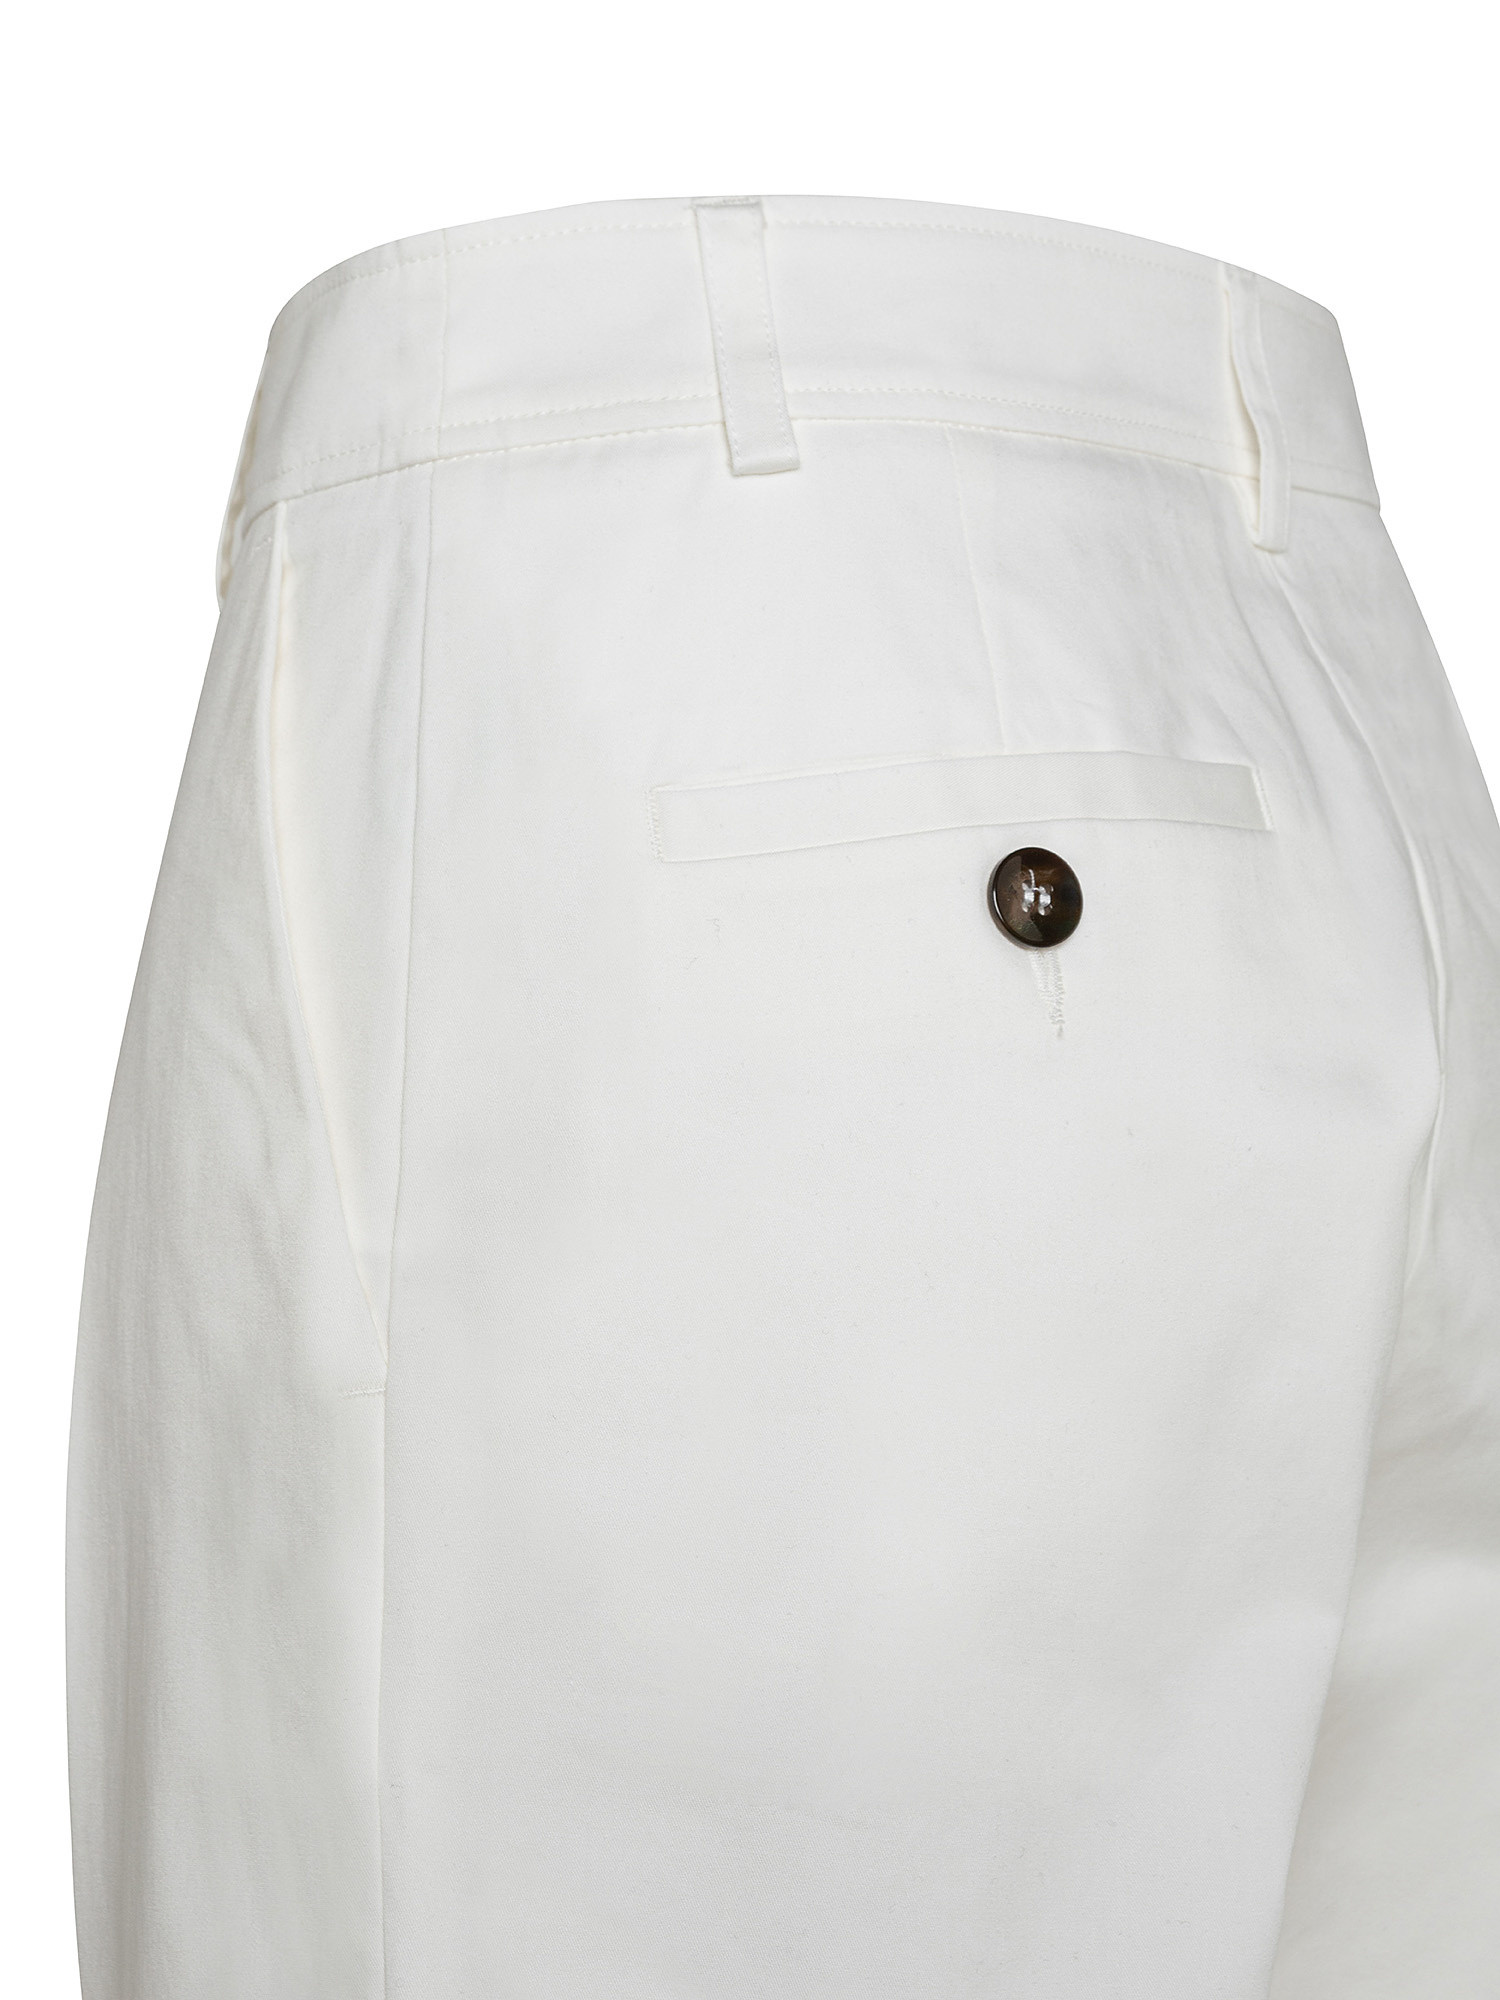 Anderson trousers in stretch cotton gabardine, White, large image number 2